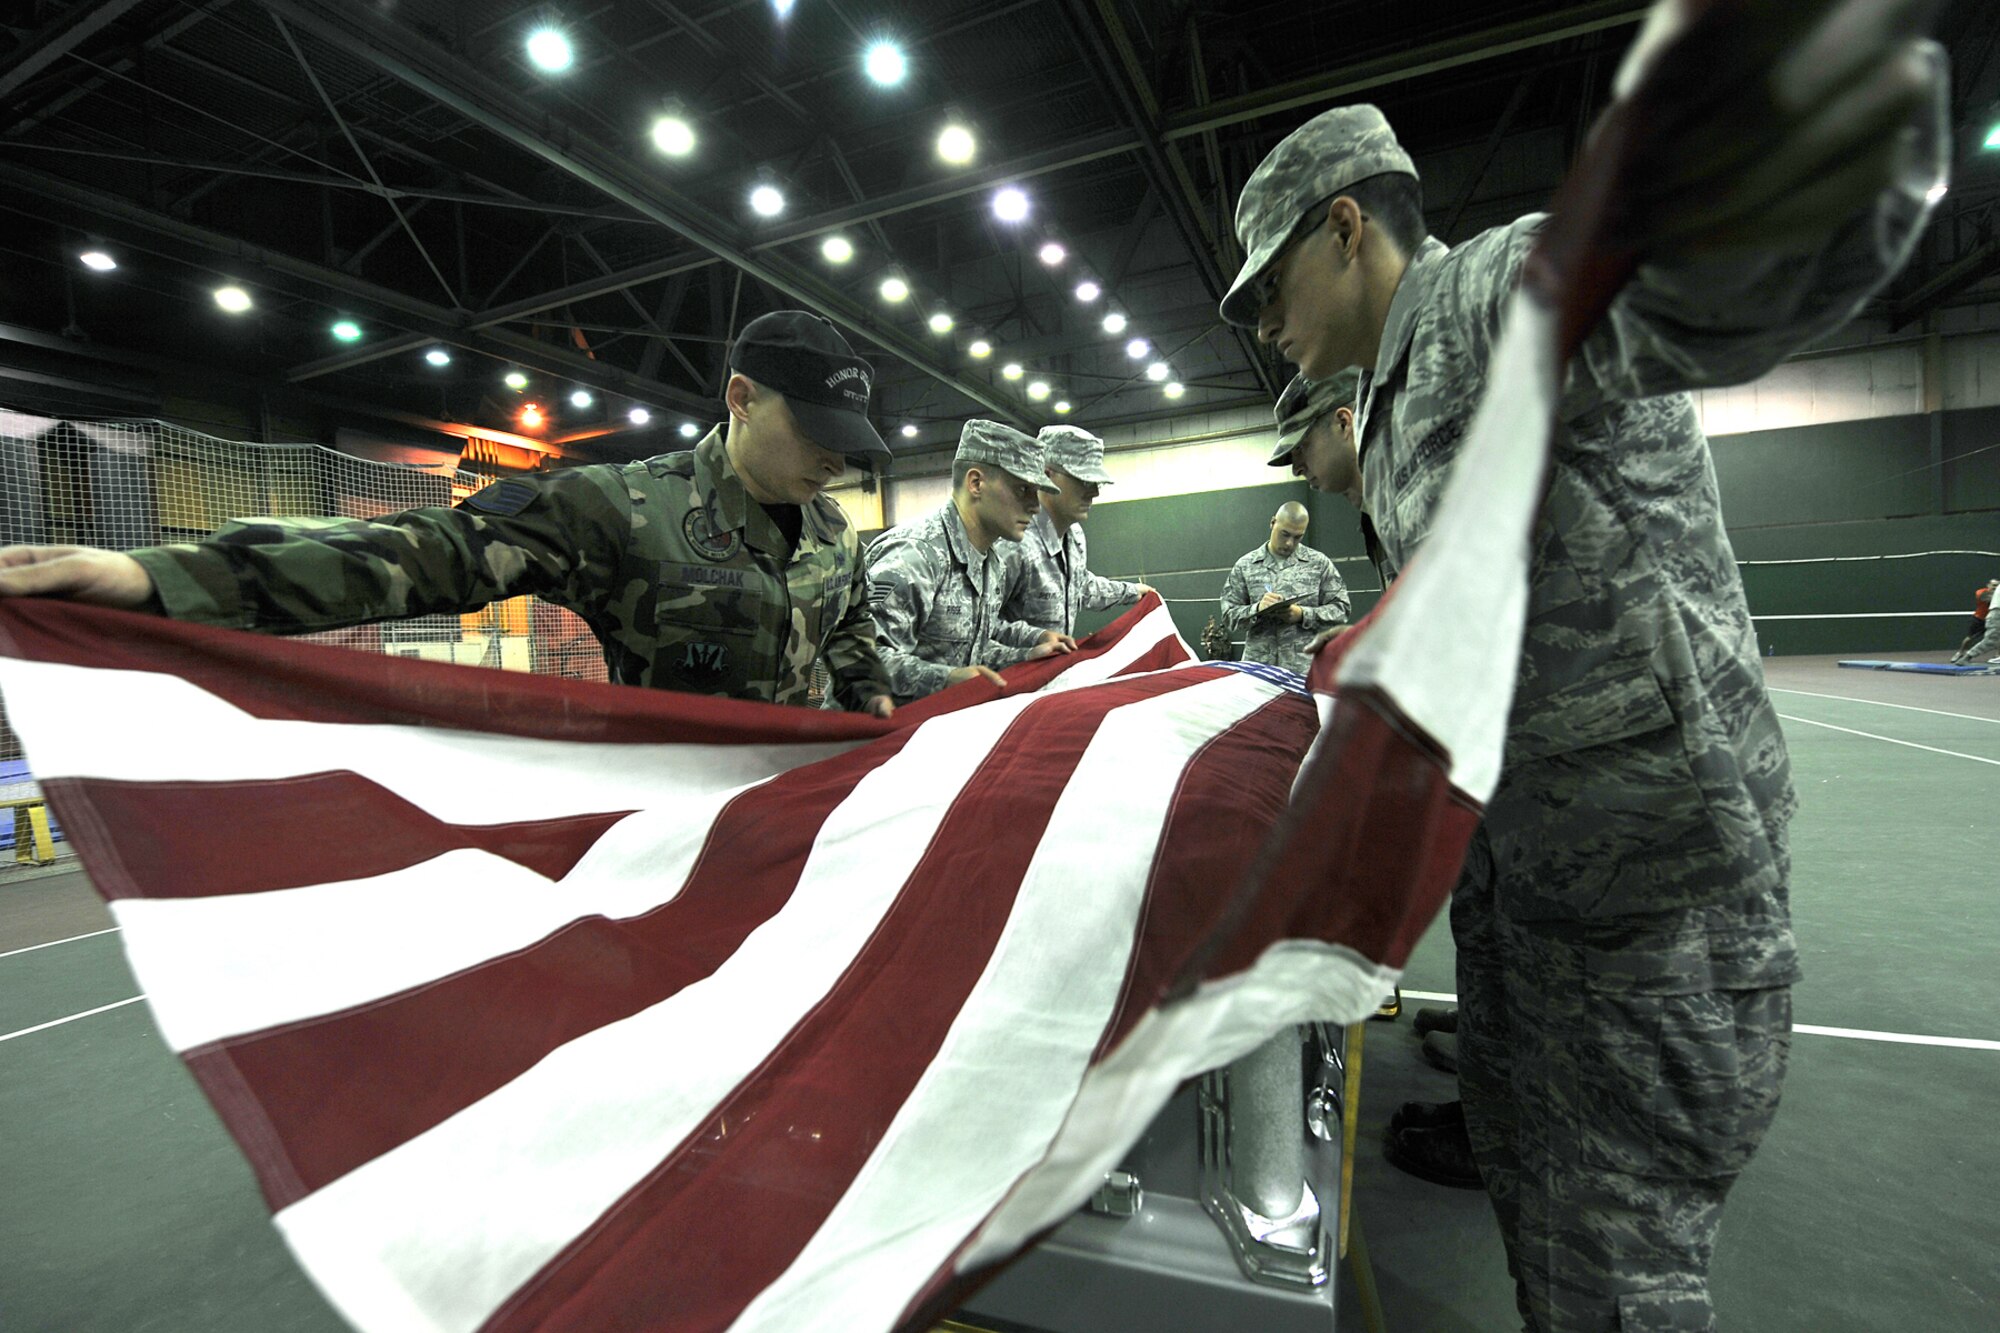 OFFUTT AIR FORCE BASE, Neb., -- A Member of the Air Force Honor Guard evaluates members of Offutt's Honor Guard, as well as honor guard members from various installations as they drape an America Flag across a coffin during honor guard training at the Martin Bomber Building here Oct. 21. The Air Force Honor Guard visited Offutt to evaluate and help sharpen the skills of honor guard members from various bases. U.S. Air Force Photo by Charles Haymond